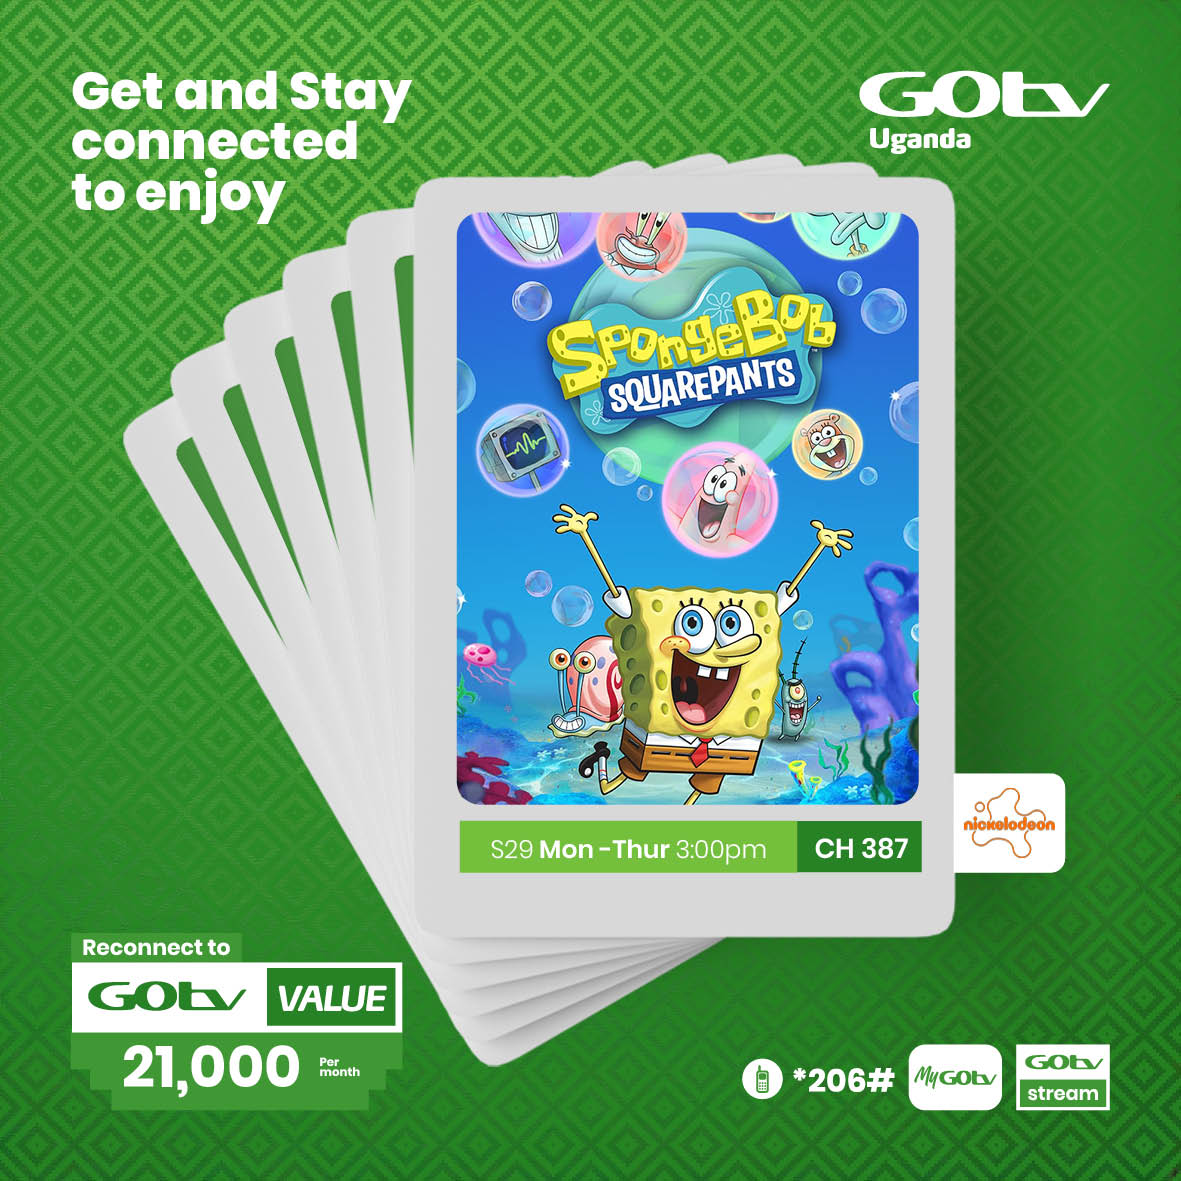 Who lives in a pineapple under the sea?🥸 Don’t miss SpongeBob SquarePants Monday to Thursday at 3pm on Nickelodeon CH 387 Download MyGOtvApp mygotv.onelink.me/JpWQ/epl1 to stay connected to GOtv #GOtvStream #PMPKuPlus #PMReloaded